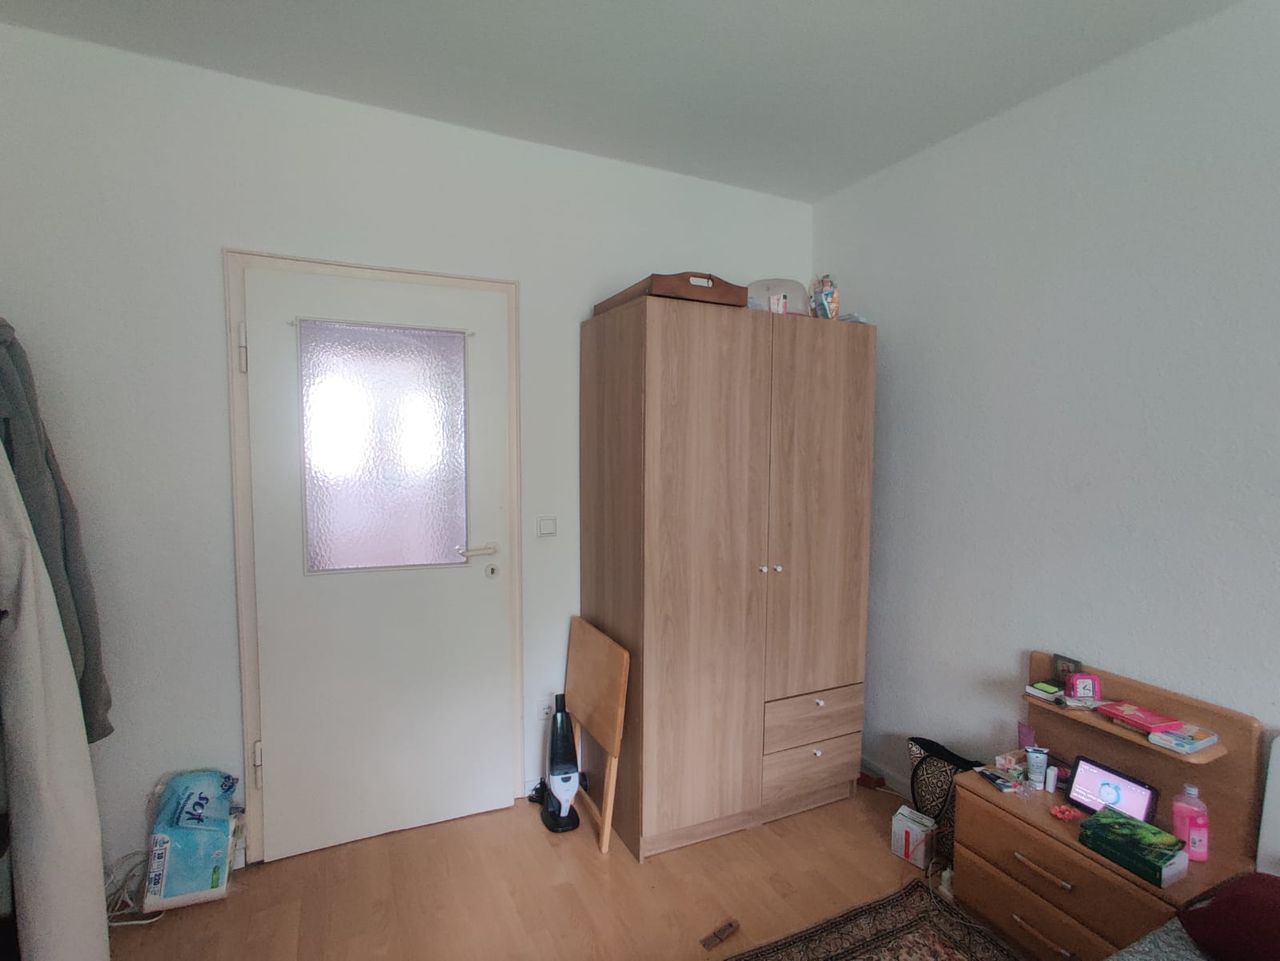 Cosy 2ZKB near Bochum city center for sublet (available for 6 months. Dates are negotiable)